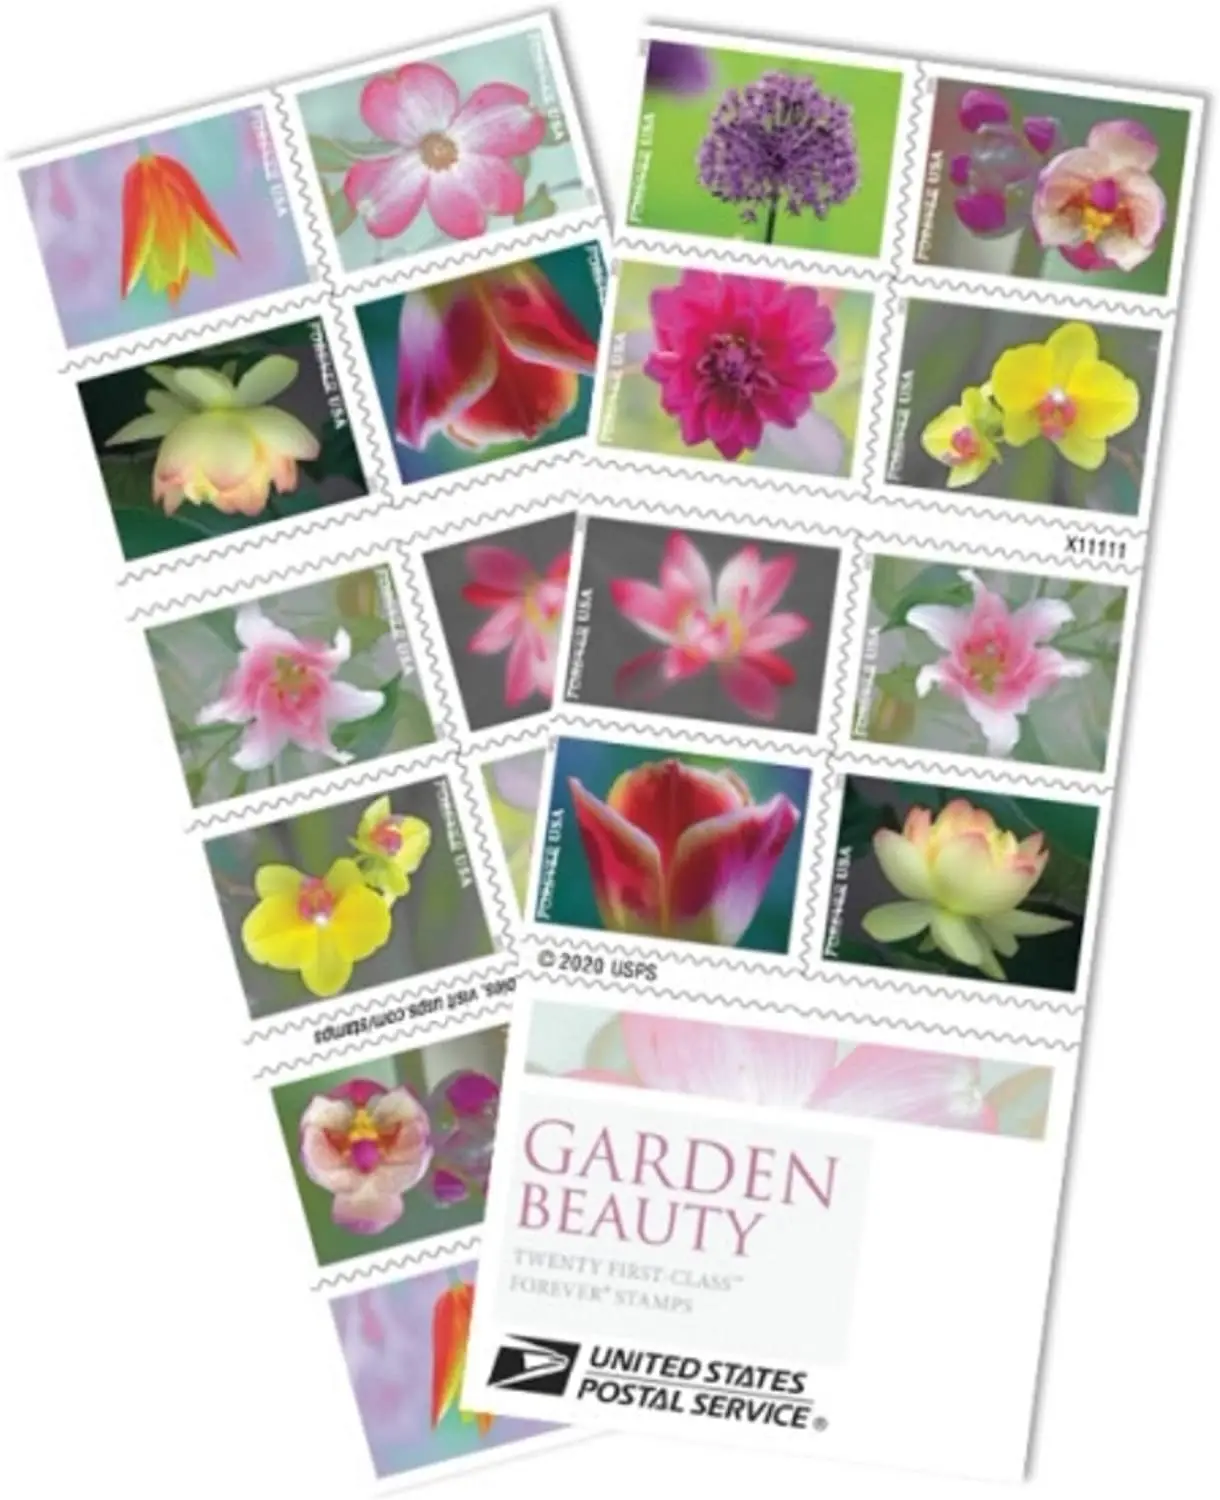 

Garden Beauty Forever Postage Stamps US Postal First Class Wedding Celebration Anniversary Flowers (1 Books of 20 Stamps)